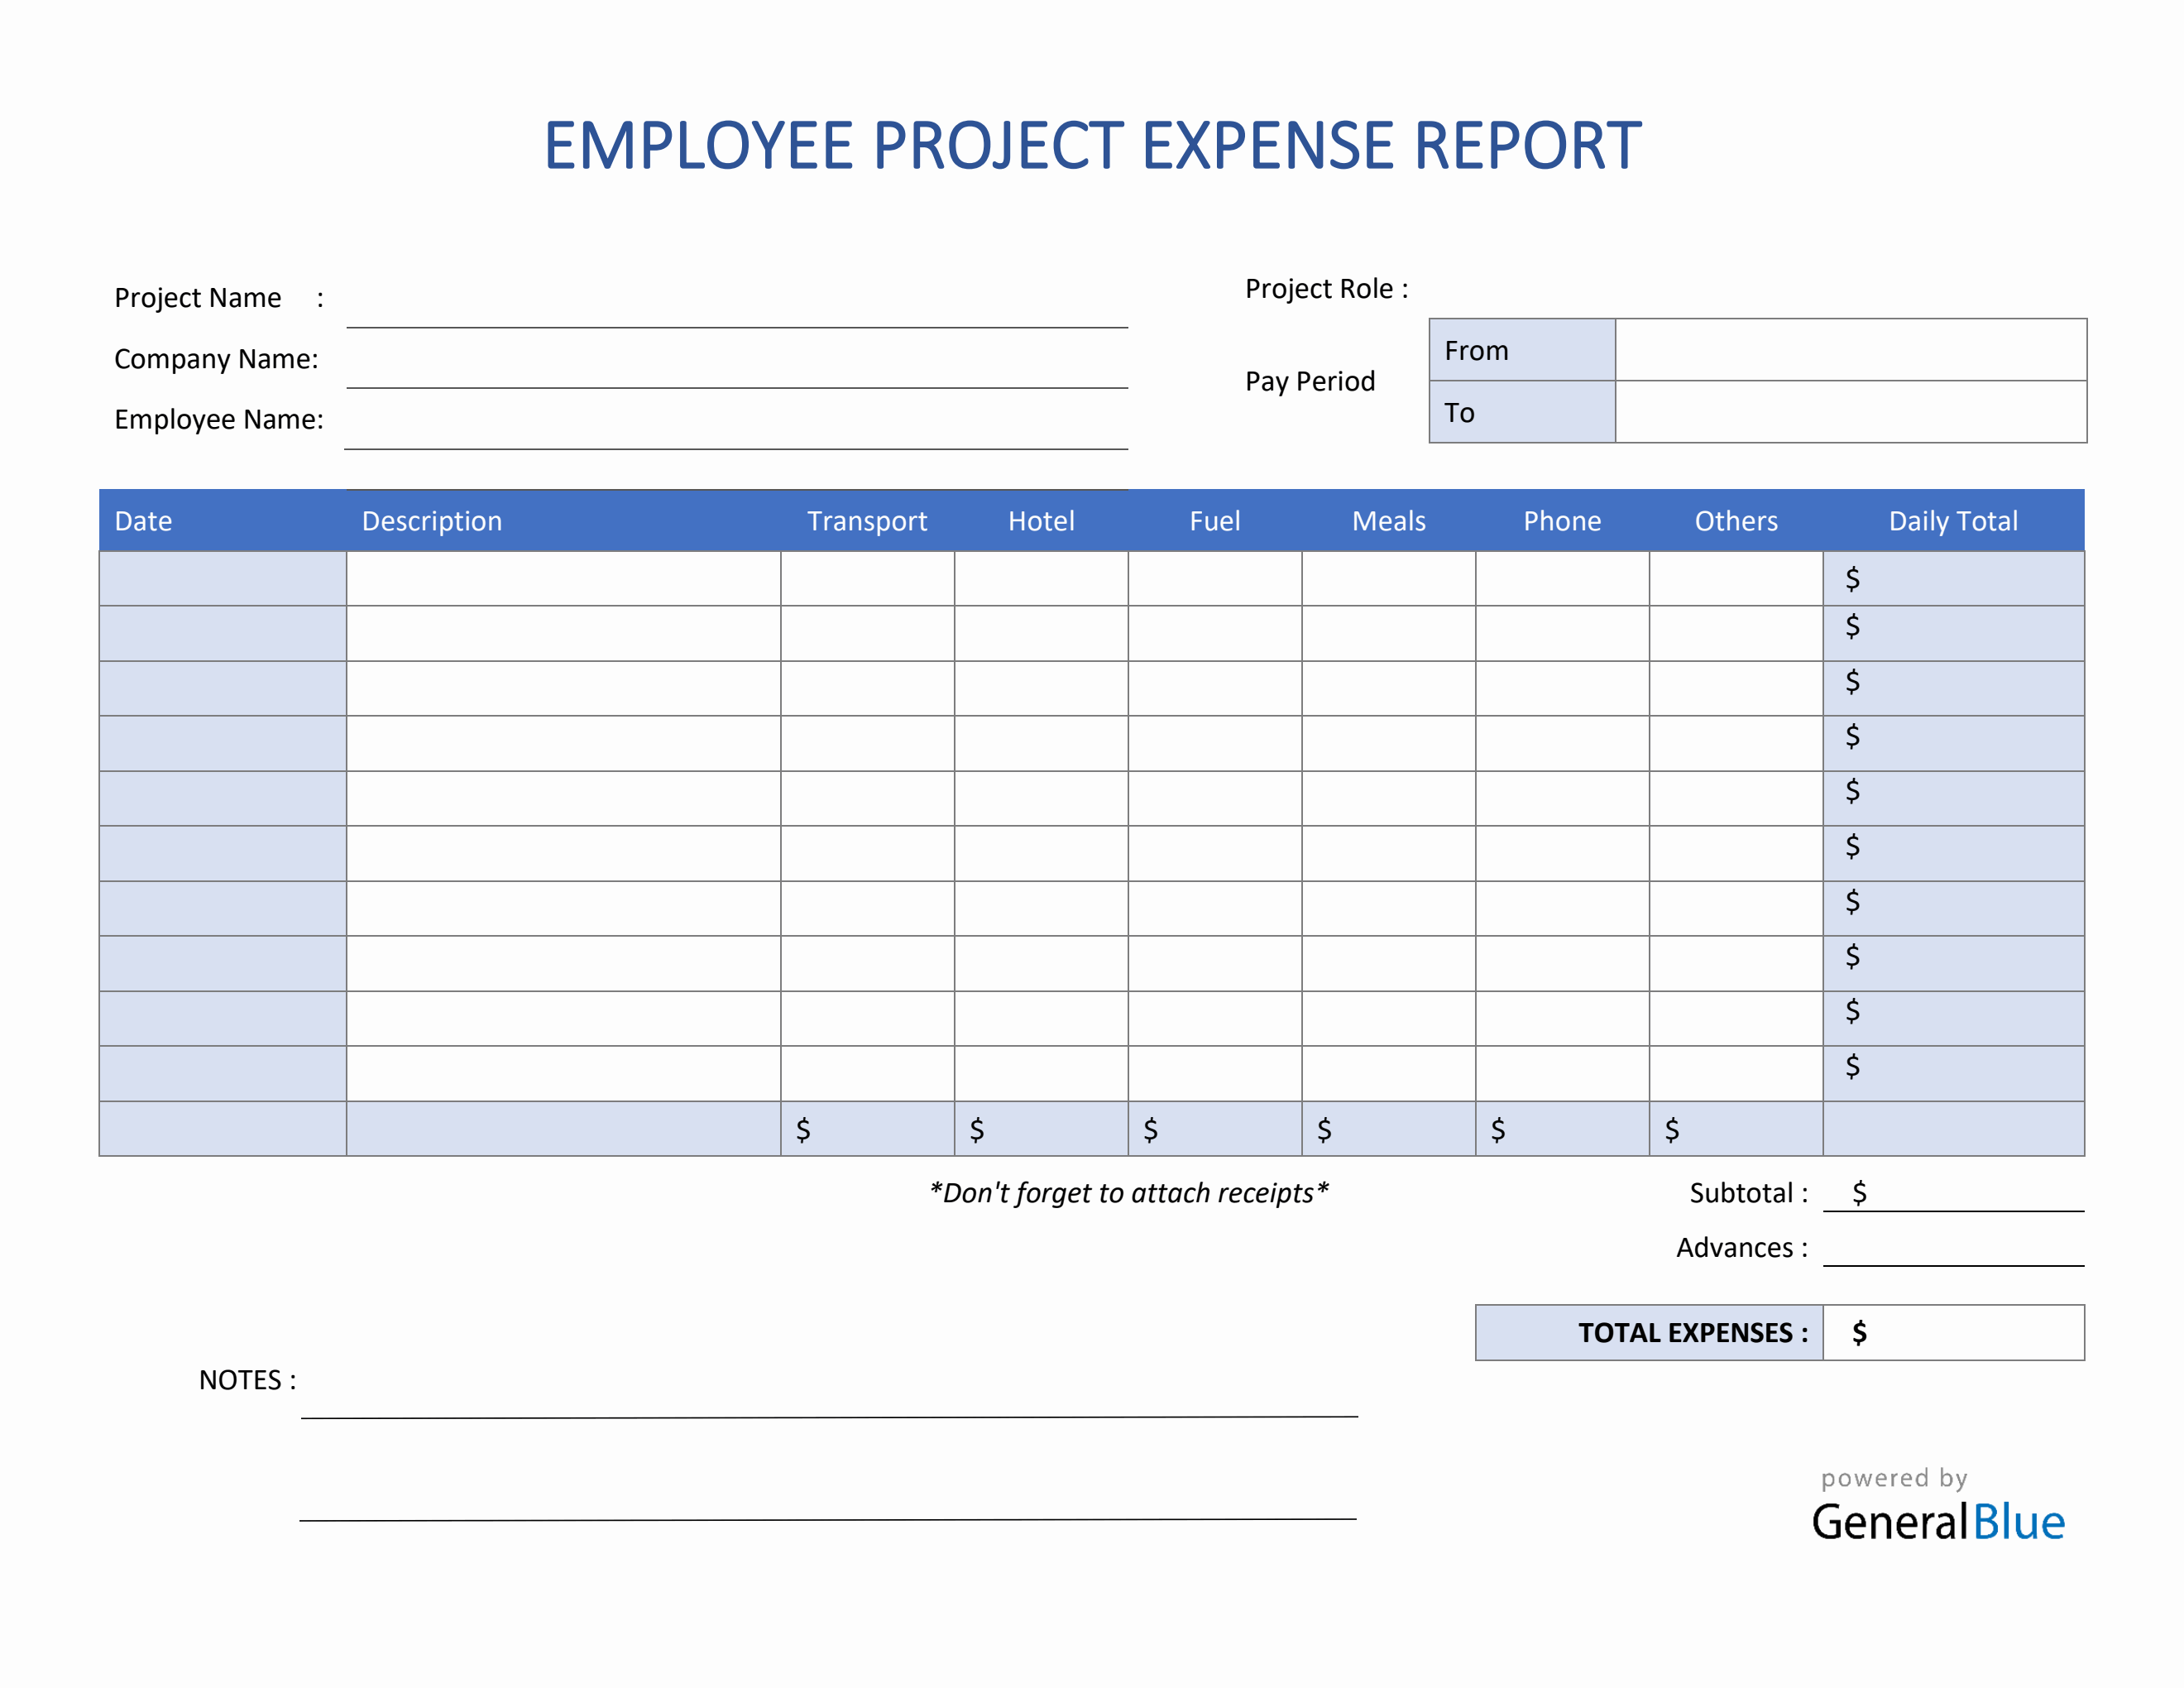 Employee Project Expense Report Template in Word Intended For Daily Expense Report Template